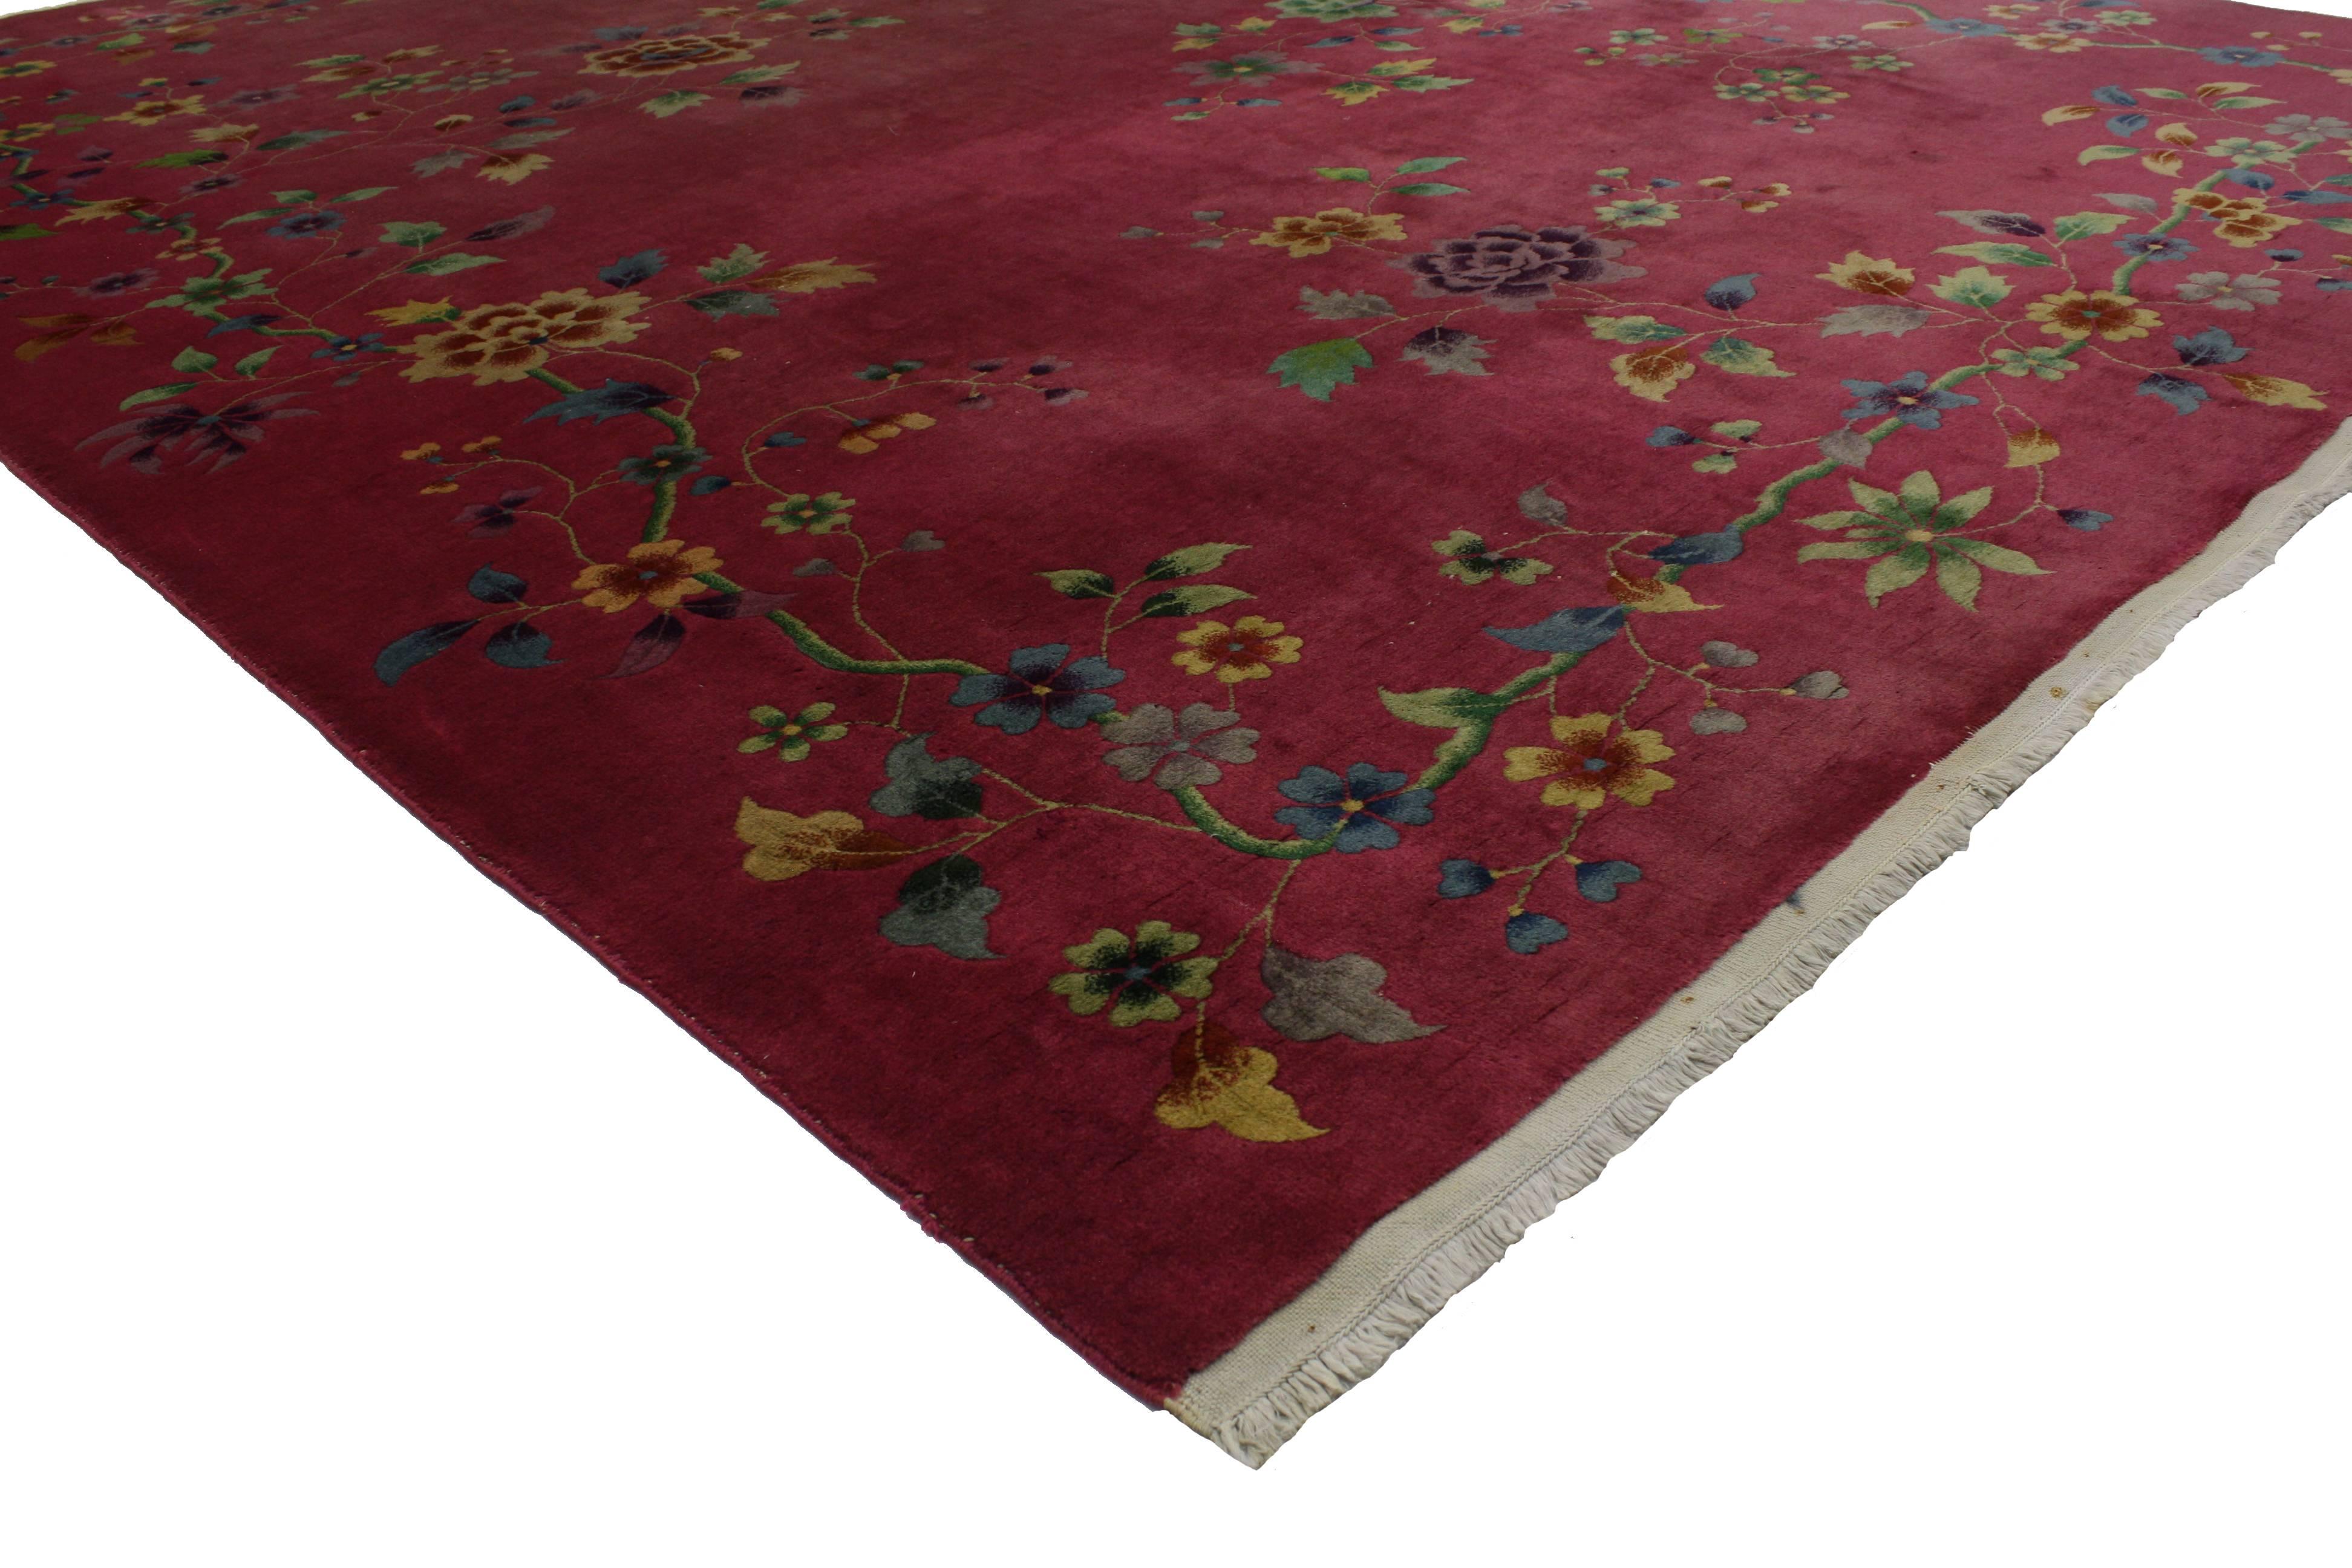 76813 Fuchsia-Raspberry, Early 20th Century Antique Chinese Art Deco Rug. Inject a little deco-color into your home with this early 20th century Chinese Art Deco rug, inspired by Walter Nichols. A vibrant fusion of jewel-tone colors and an